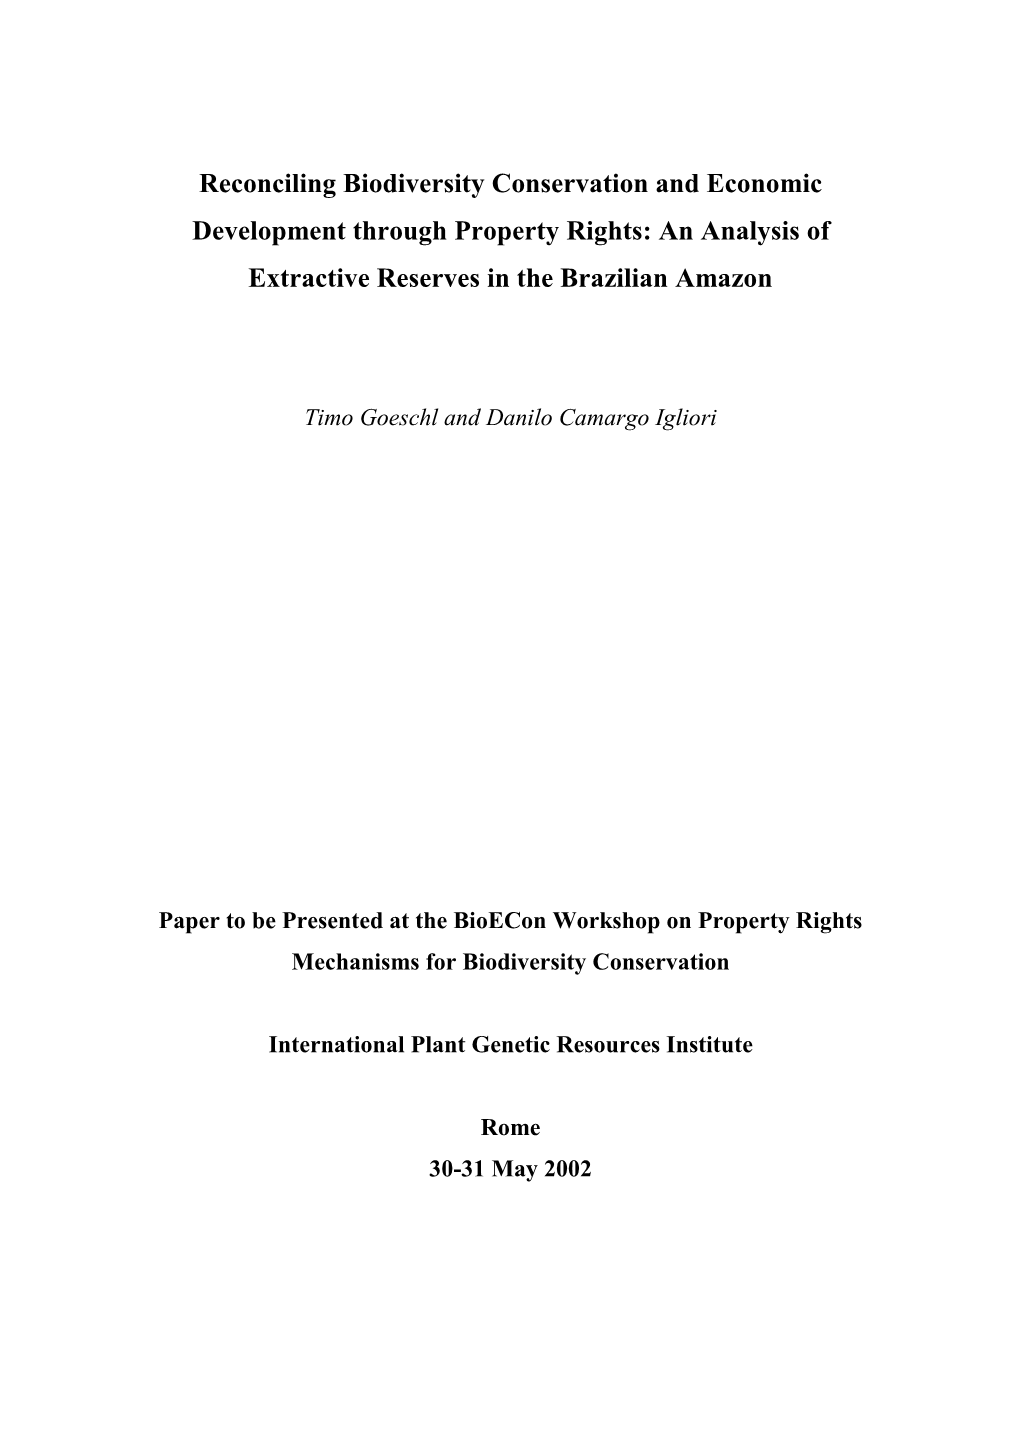 Reconciling Biodiversity Conservation and Economic Development Through Property Rights: an Analysis of Extractive Reserves in the Brazilian Amazon